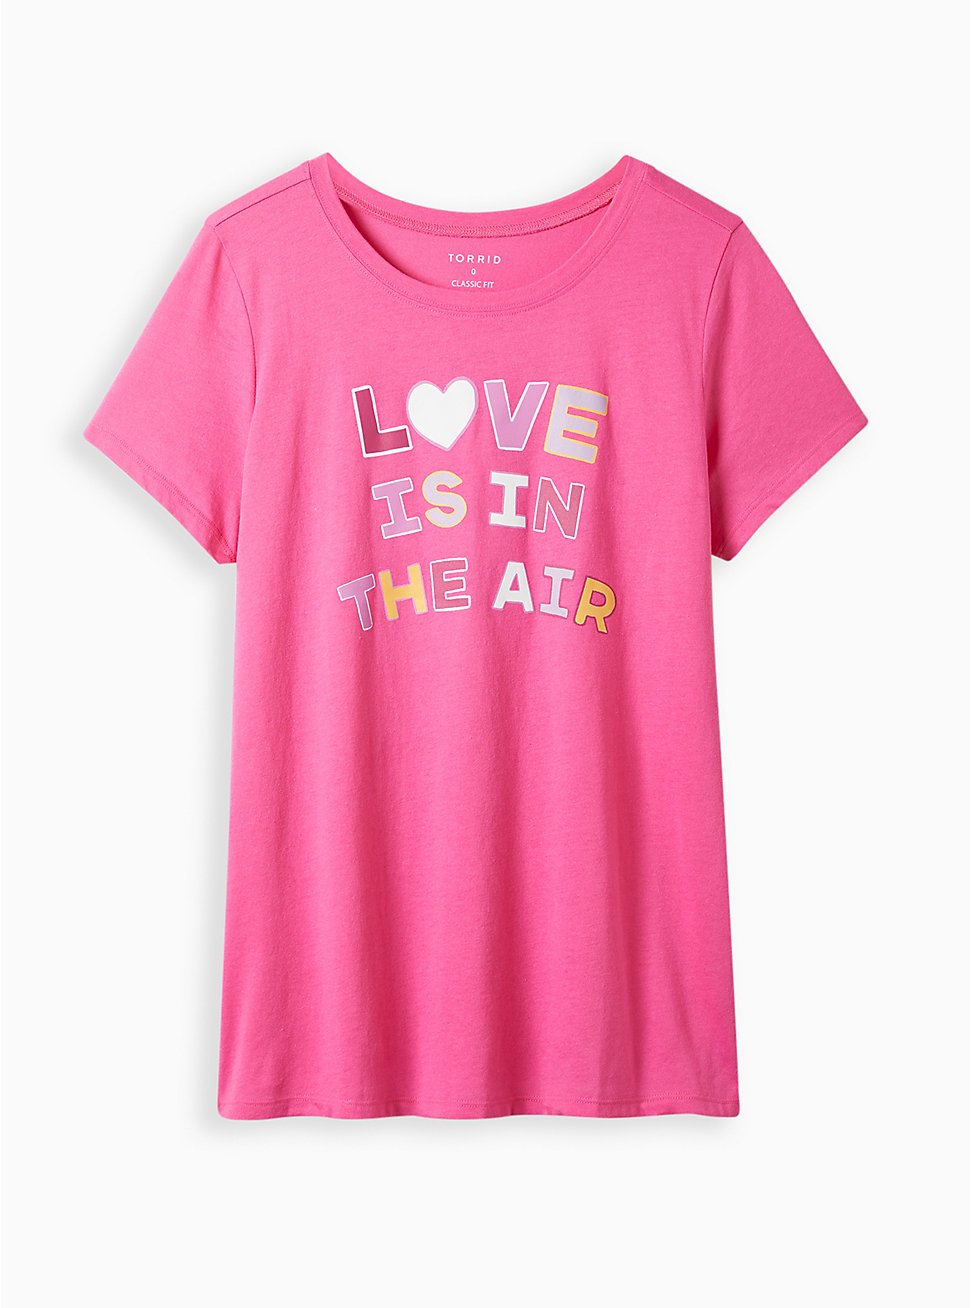 Plus Size Everyday Tee - Signature Jersey Love Is In The Air Pink, PINK, hi-res